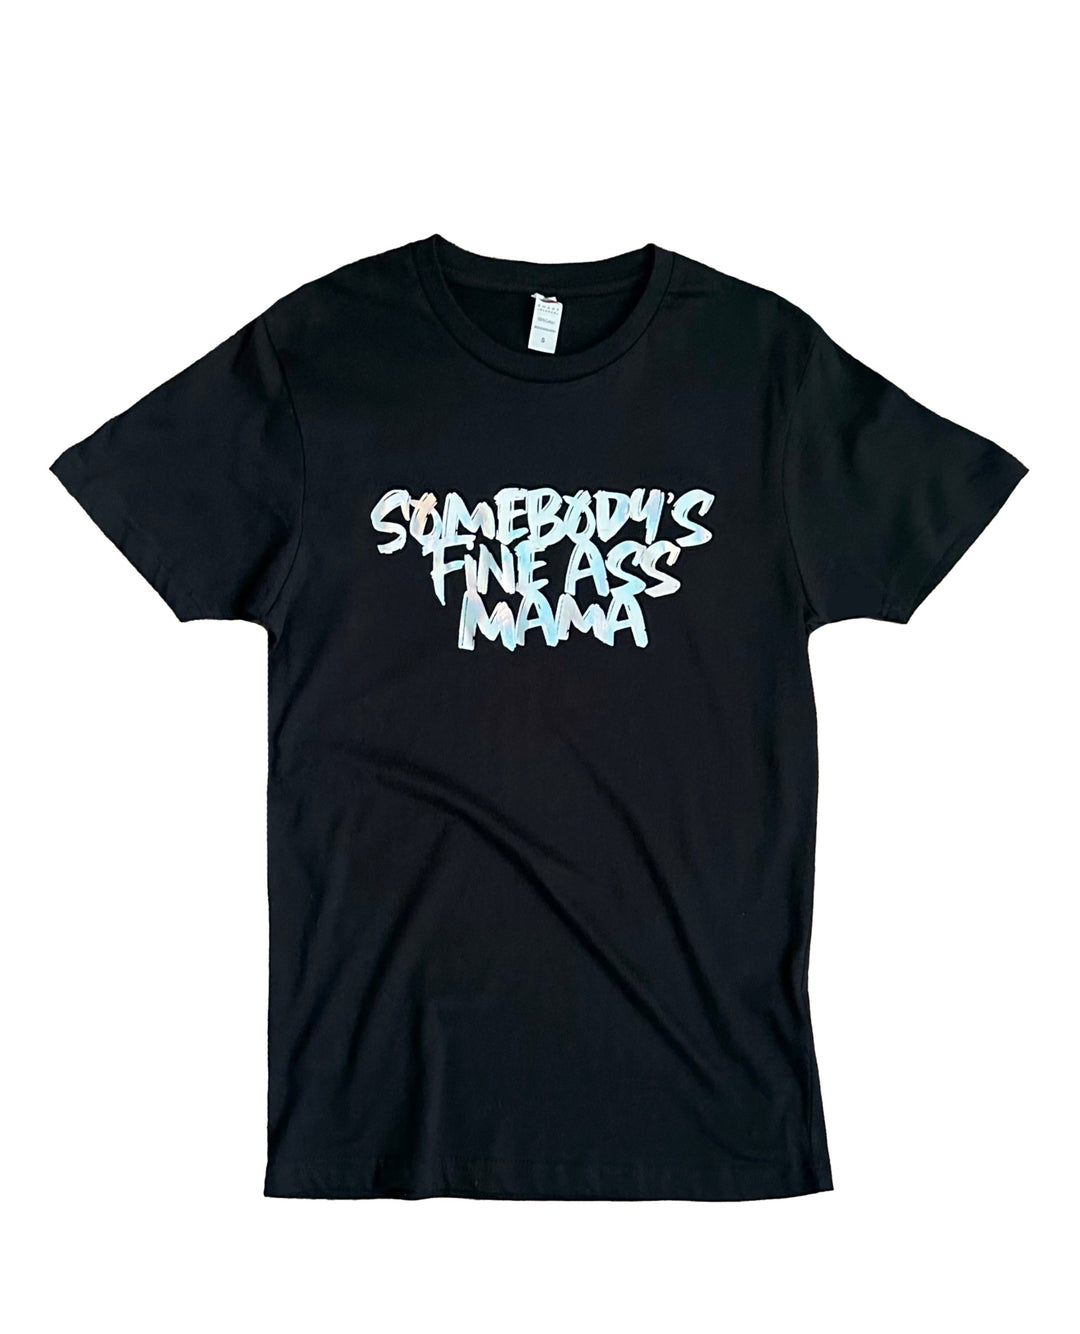 a black t - shirt with some writing on it